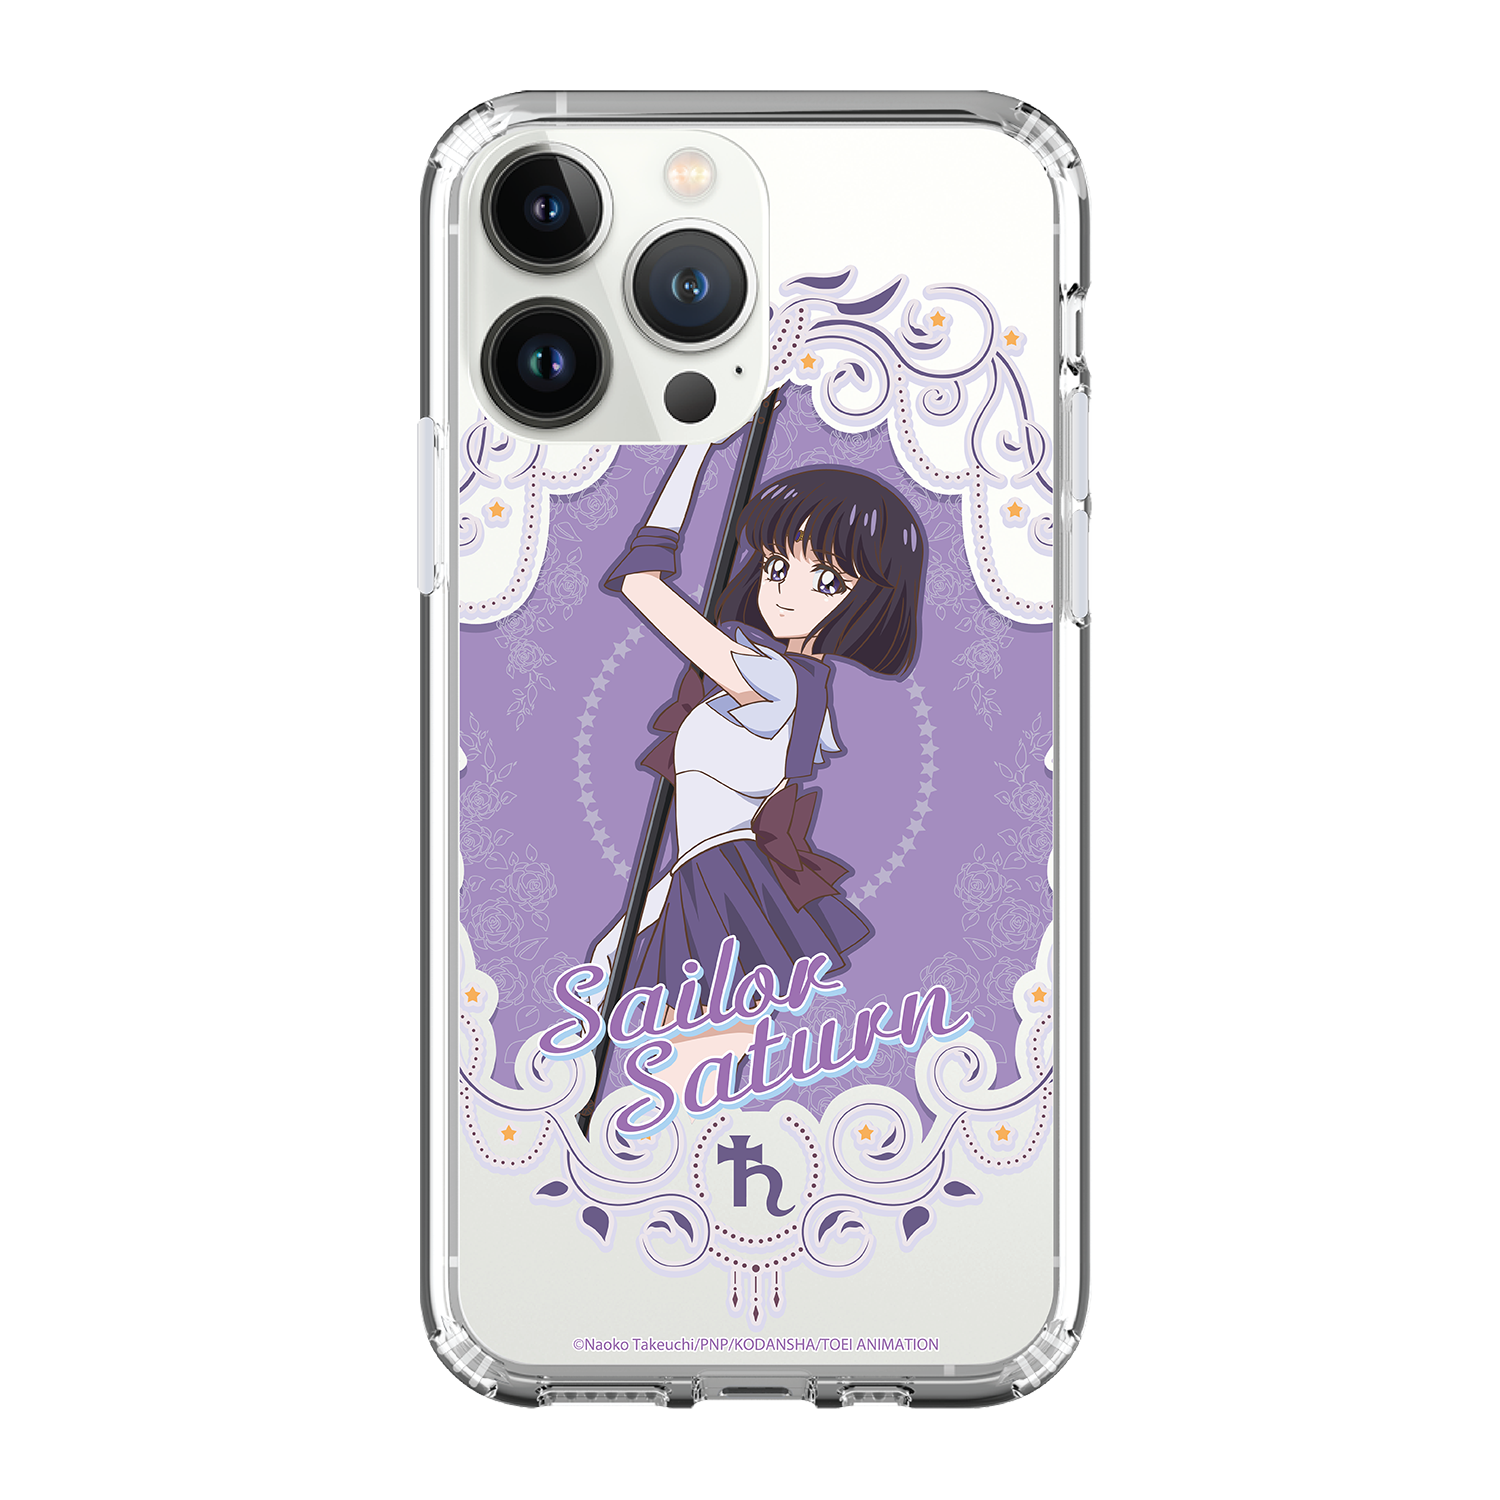 Sailor Moon Clear Case / iPhone Case / Android Case / Samsung Case 美少女戰士 正版授權 全包邊氣囊防撞手機殼 (SA94)